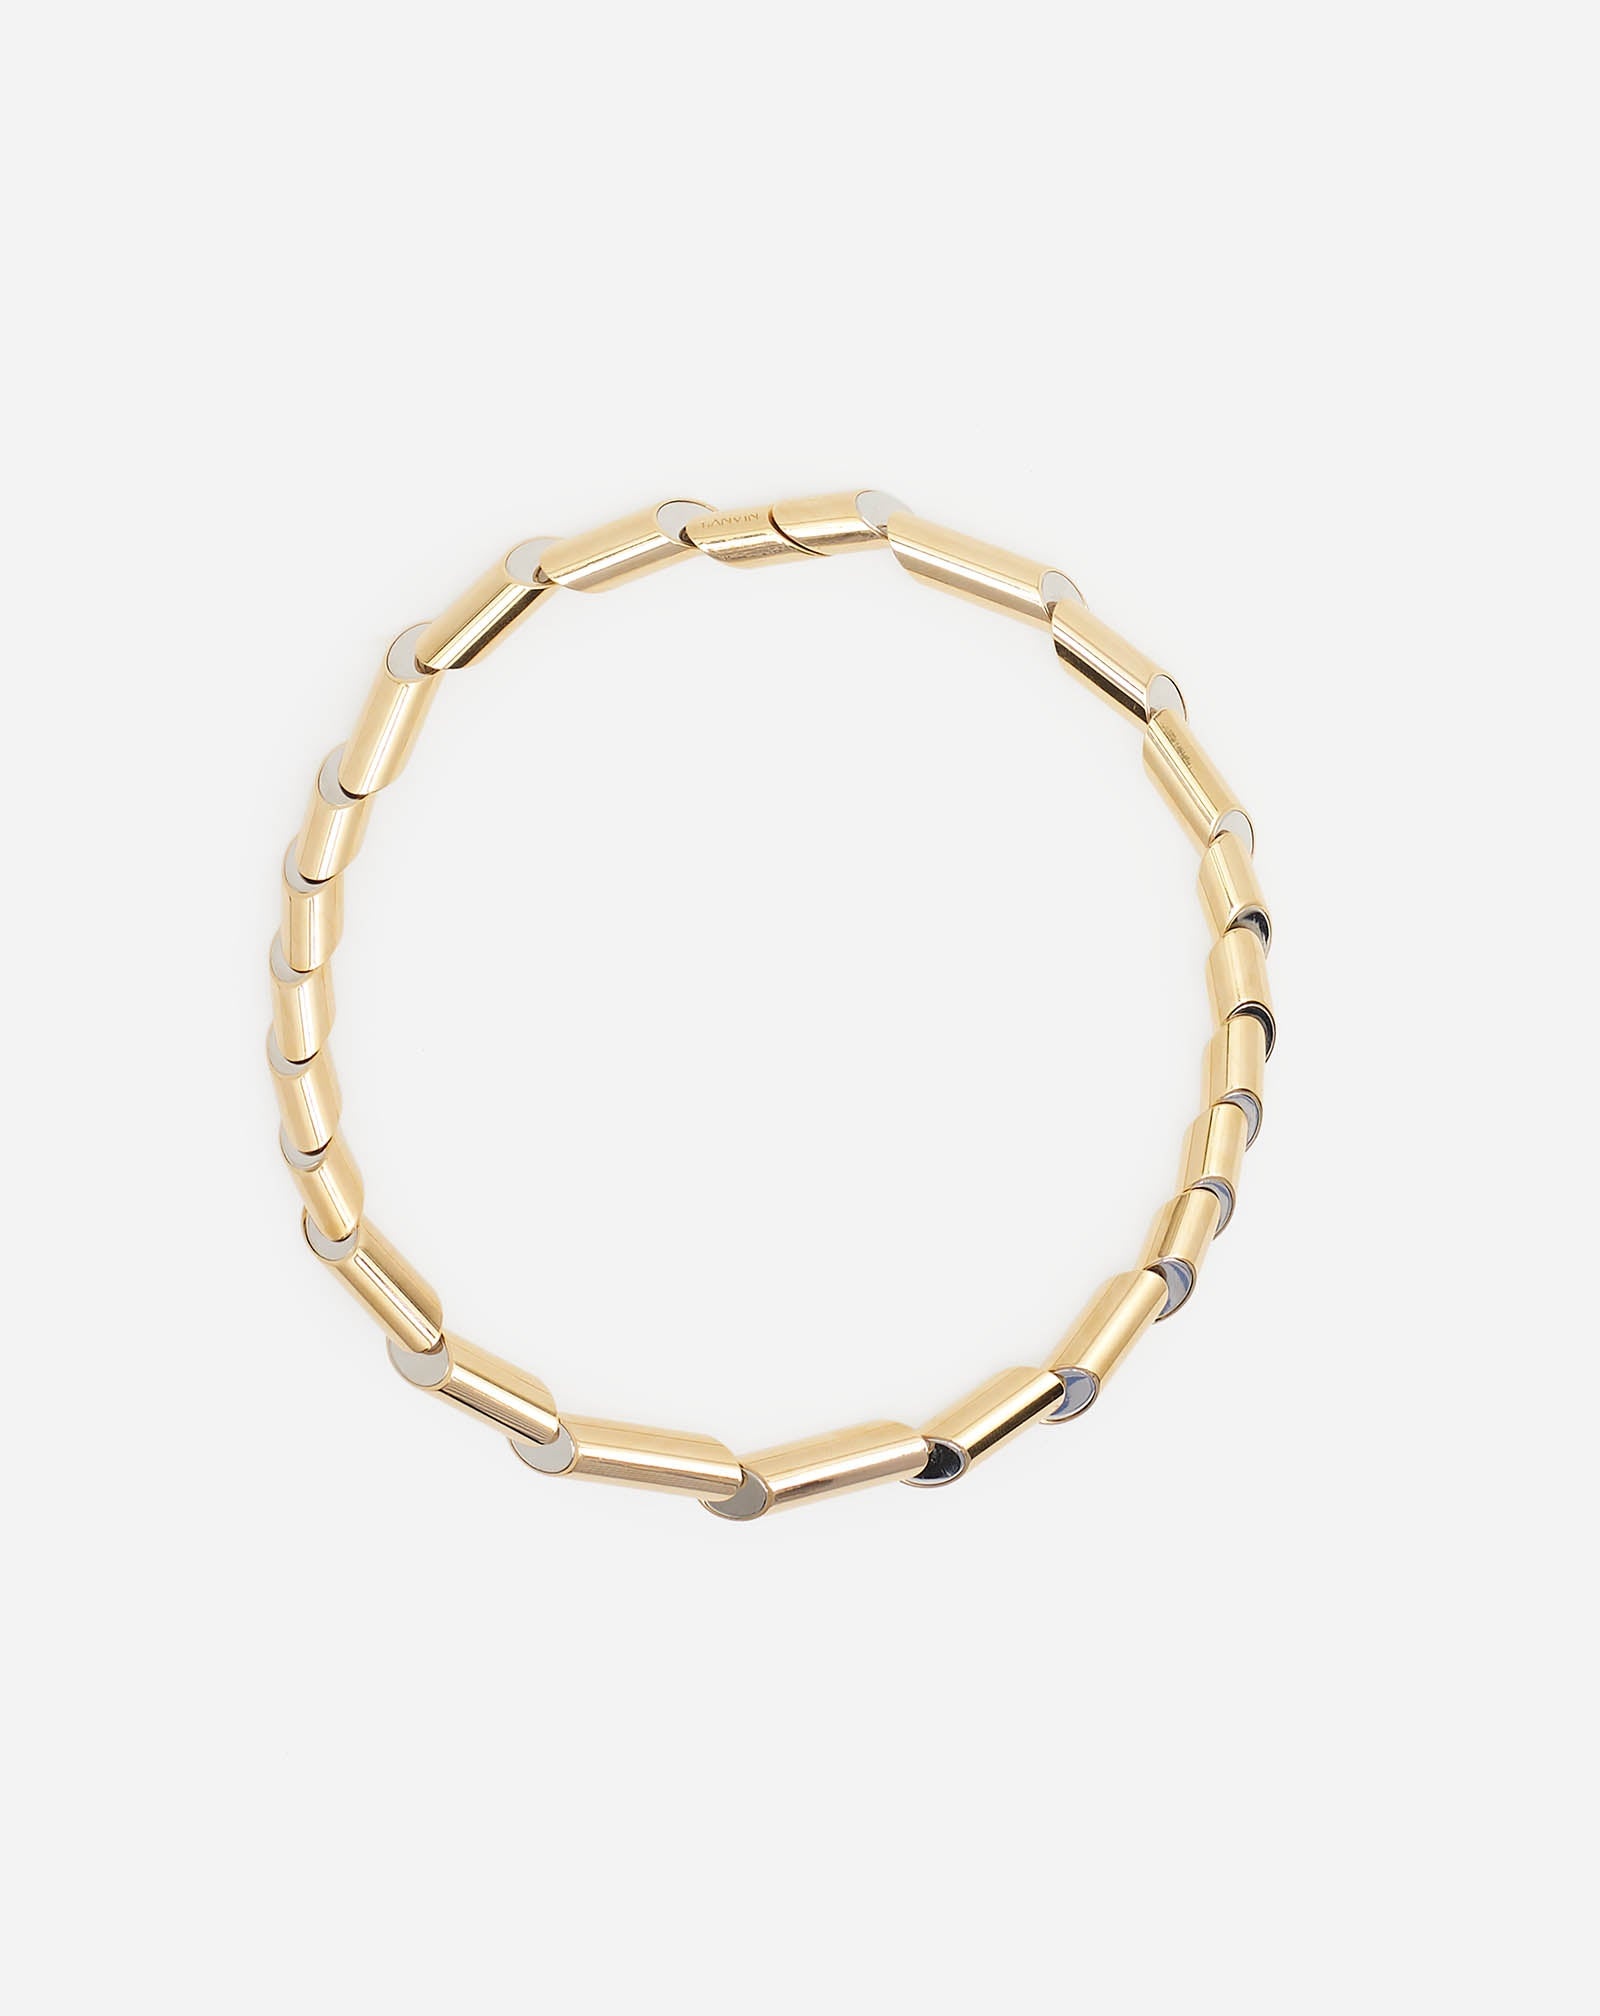 SEQUENCE BY LANVIN CHOKER NECKLACE - 1